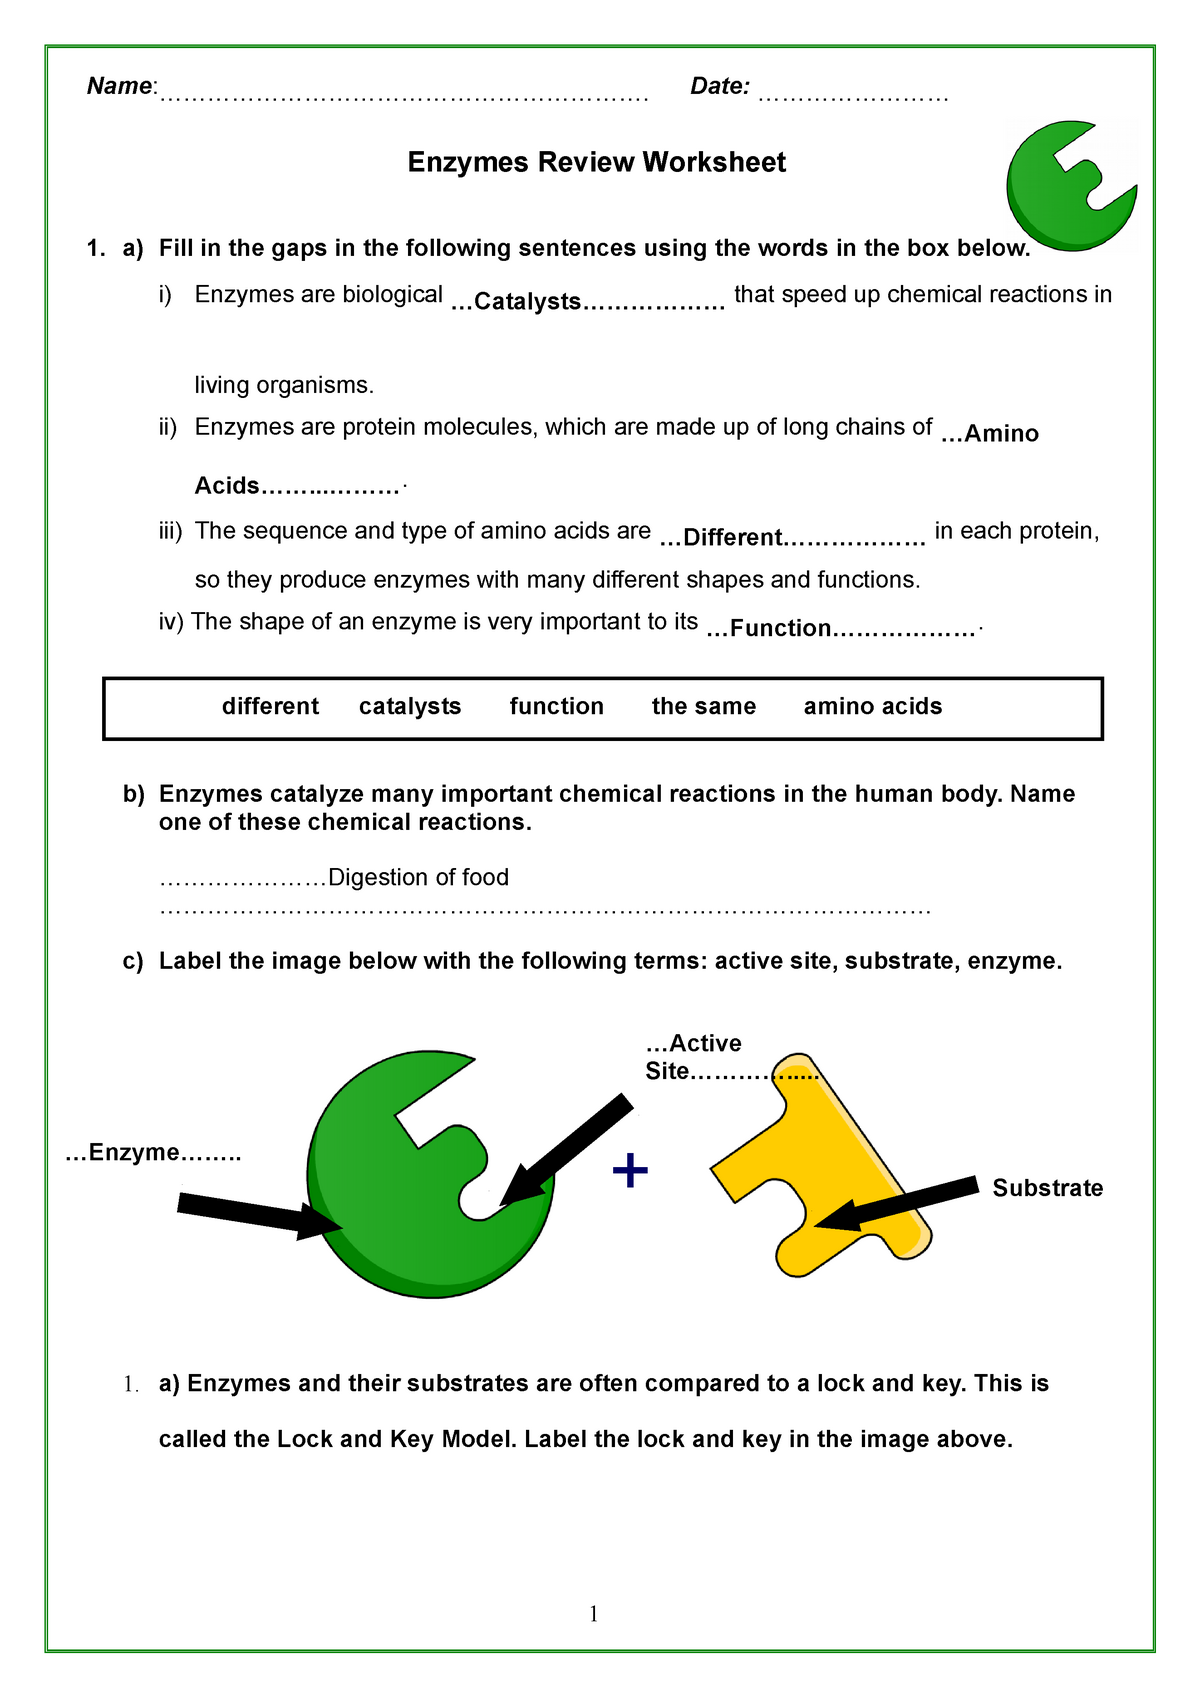 Enzymes review activity key - BLAW20 - Nursing - StuDocu Pertaining To Enzymes Worksheet Answer Key